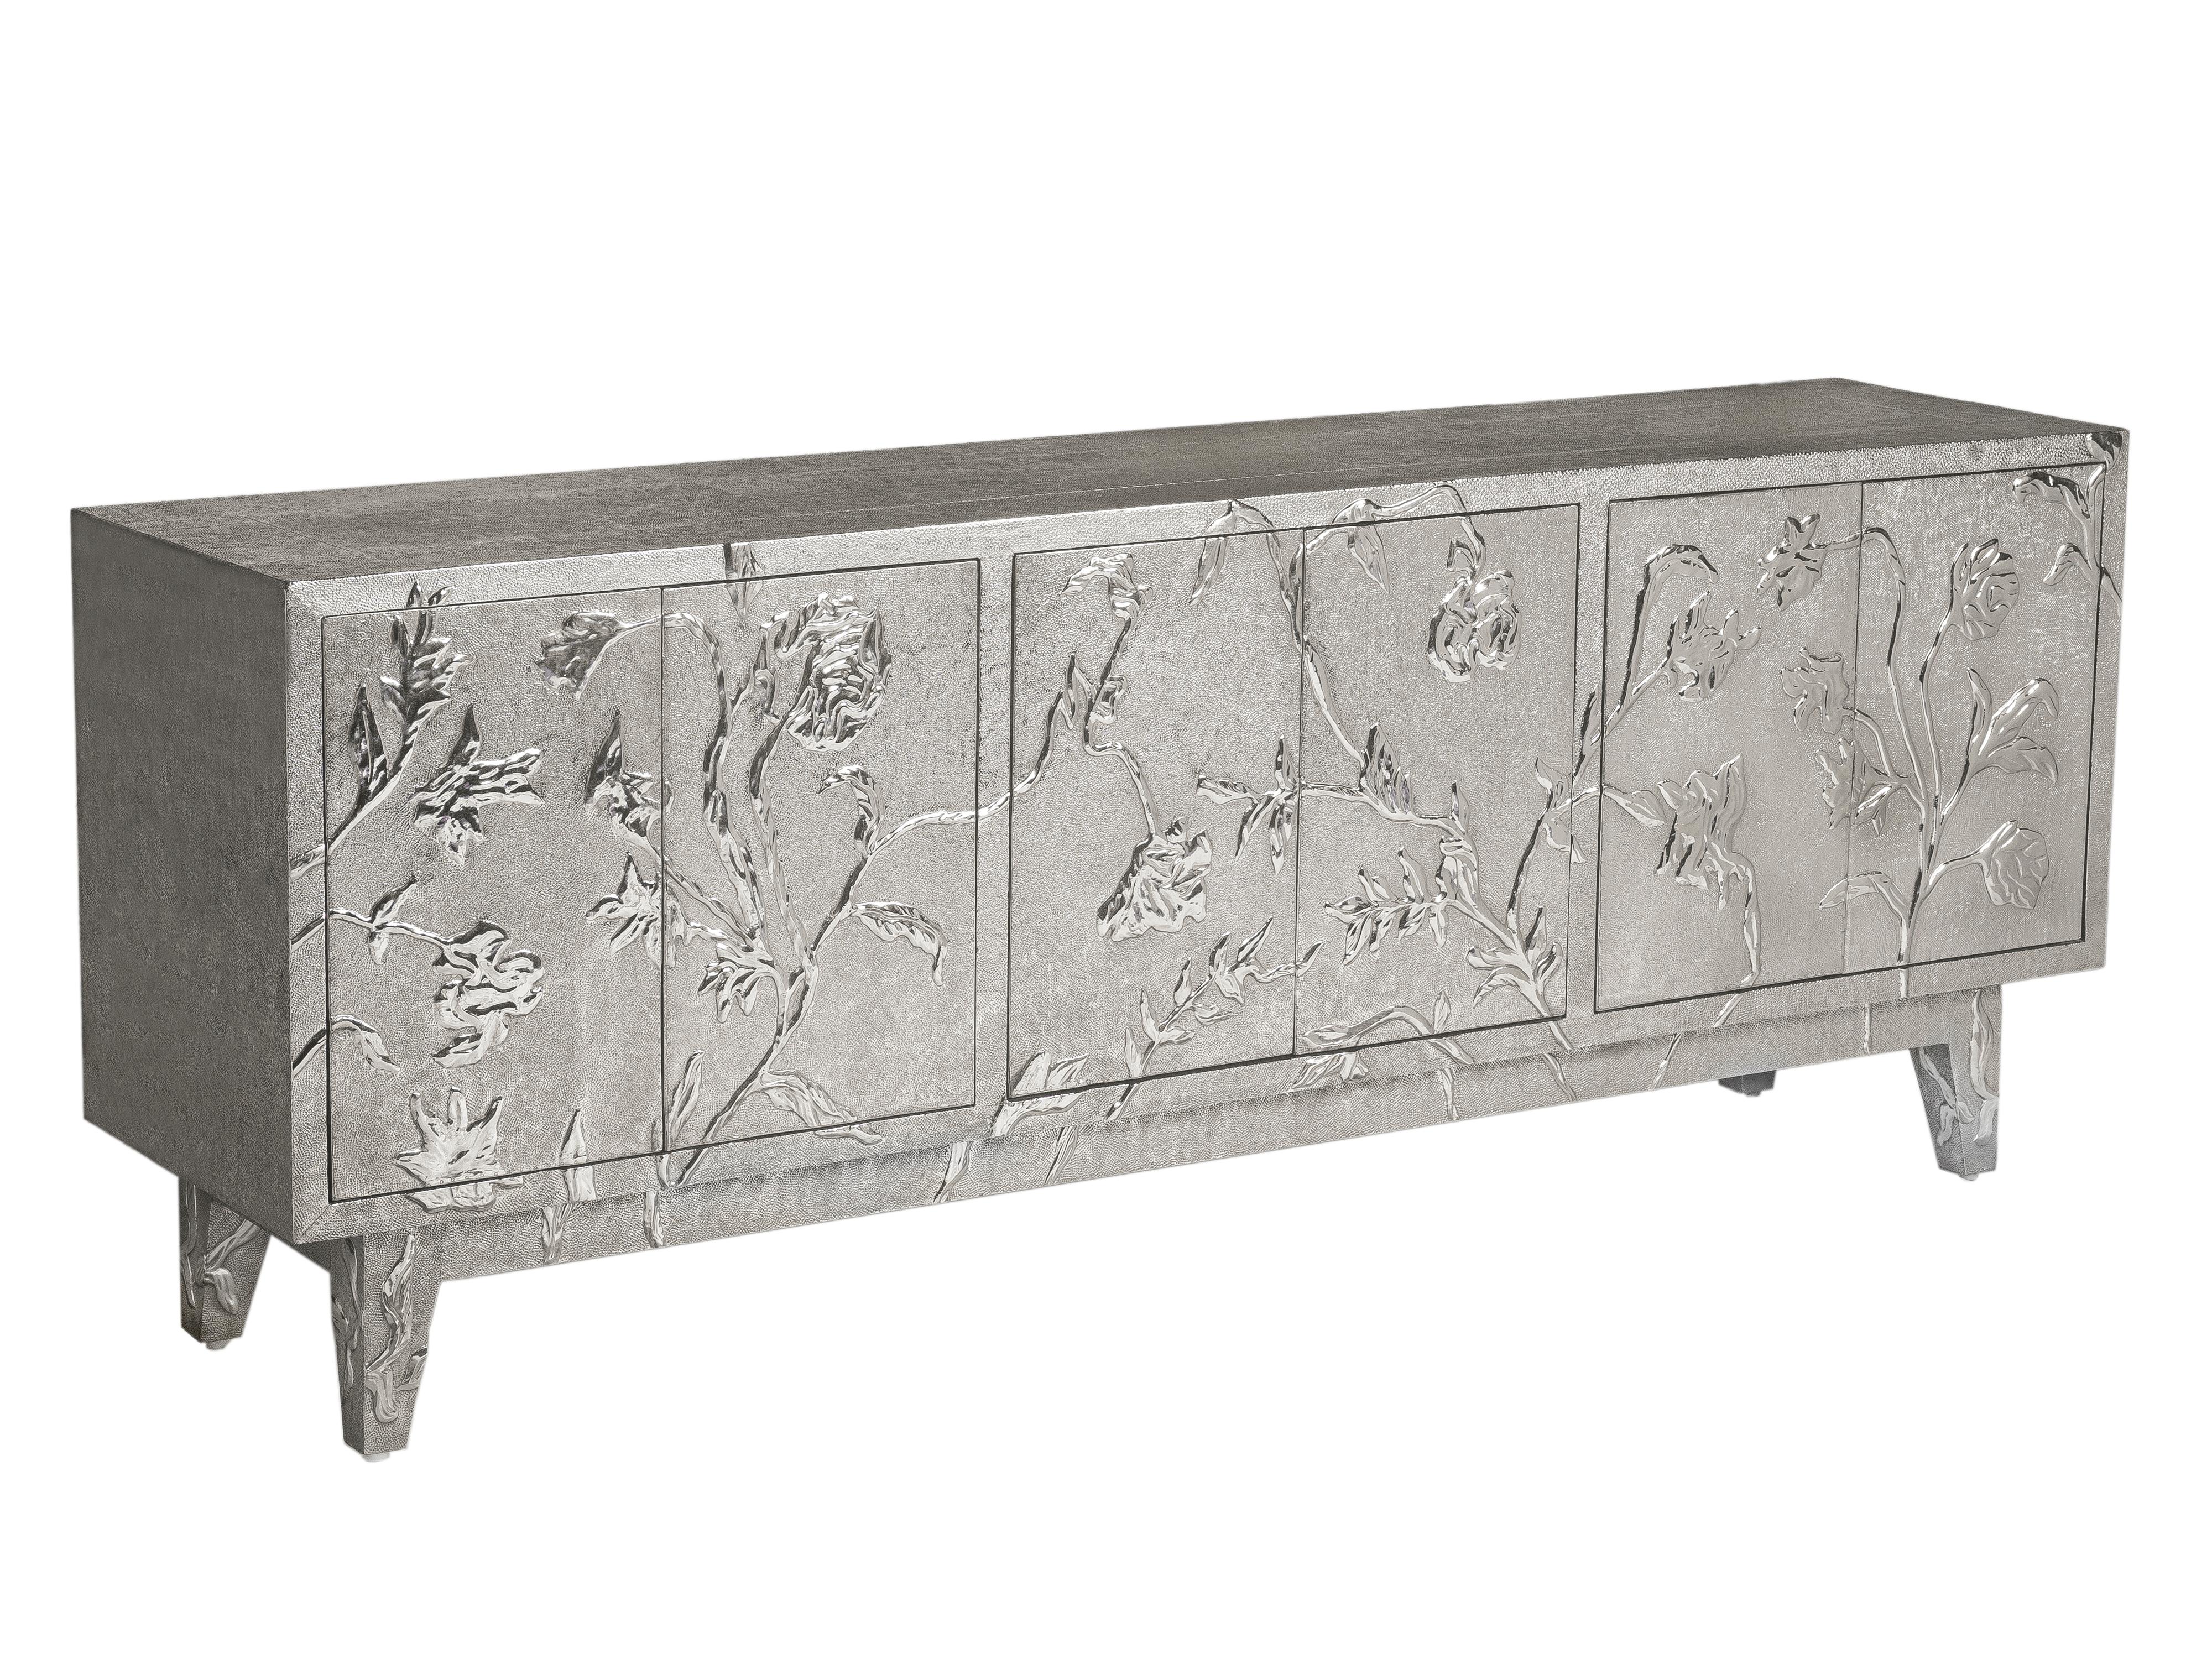 Hand-Carved Art Deco Buffet Sideboard in Floral Design by Stephanie Odegard For Sale